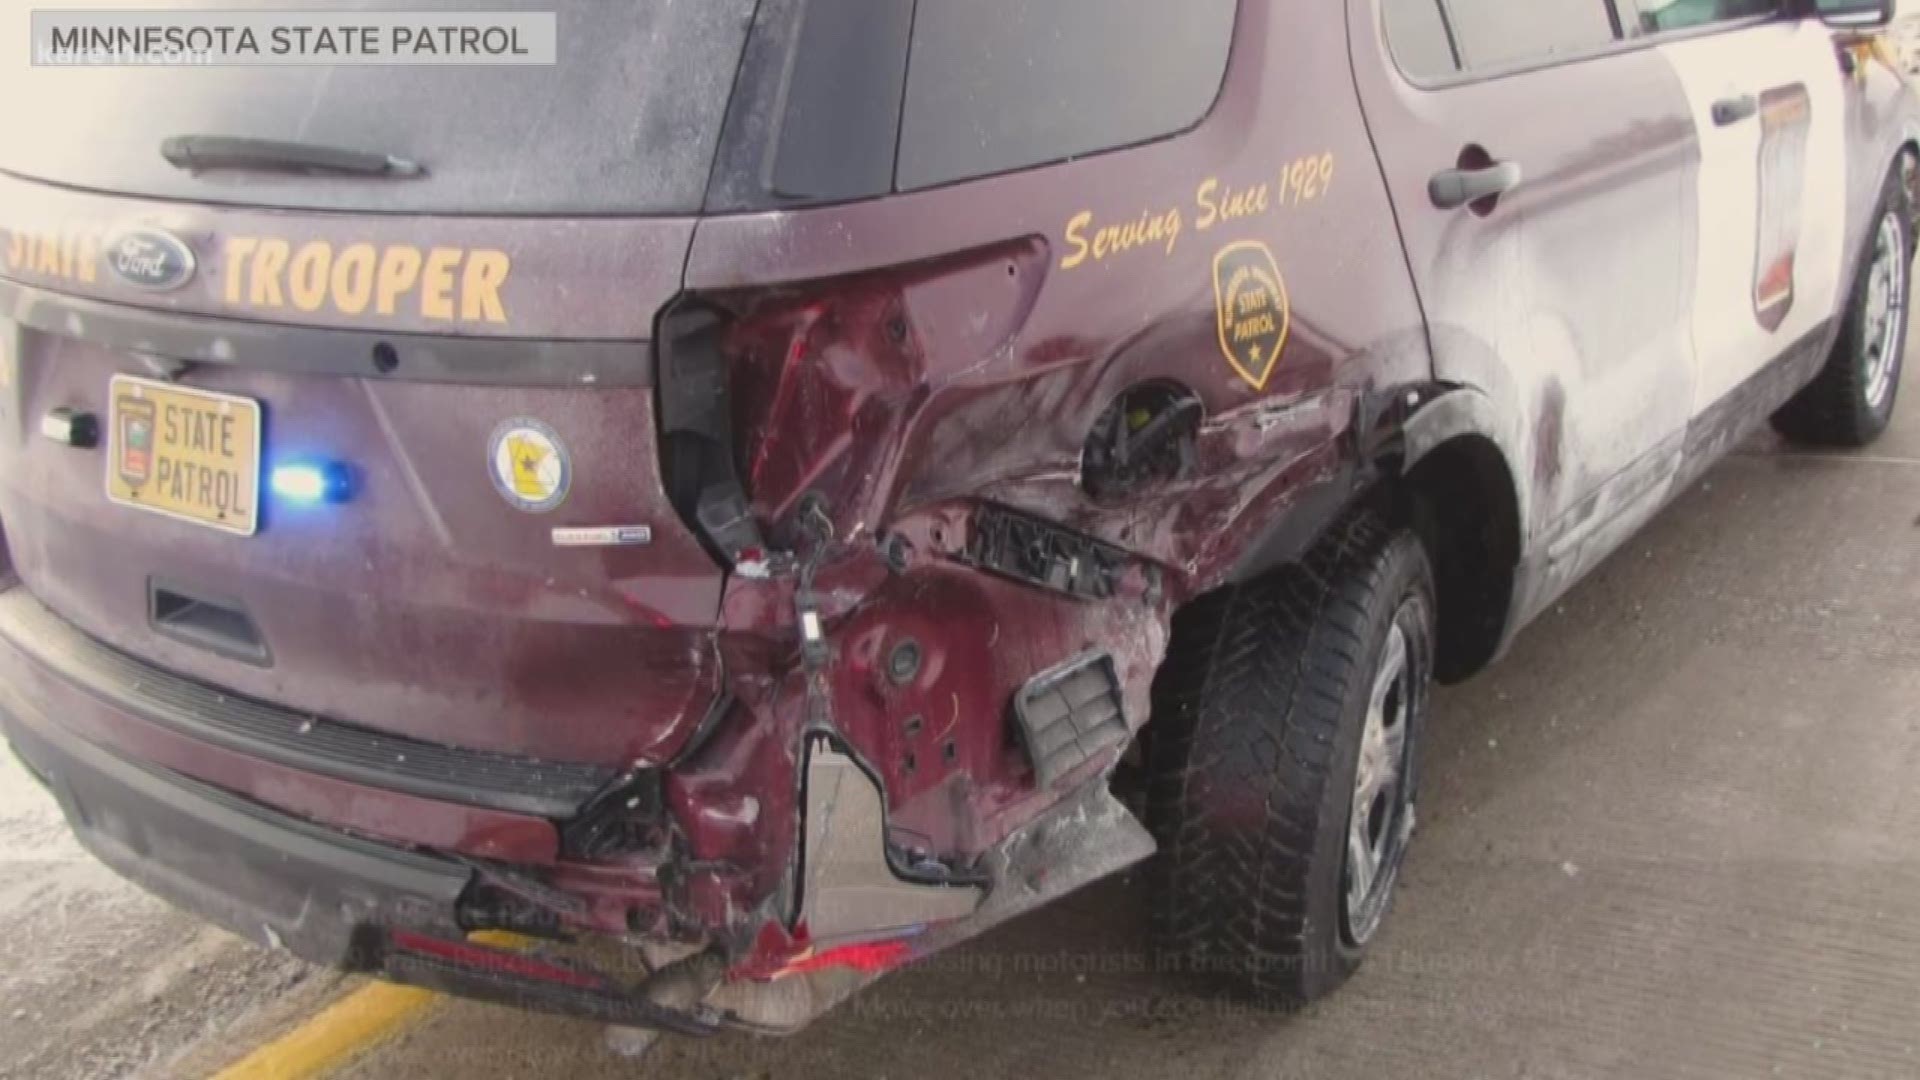 The Minnesota Department of Public Safety says 15 State Patrol squads were hit so far in February. https://kare11.tv/2tDZhdc